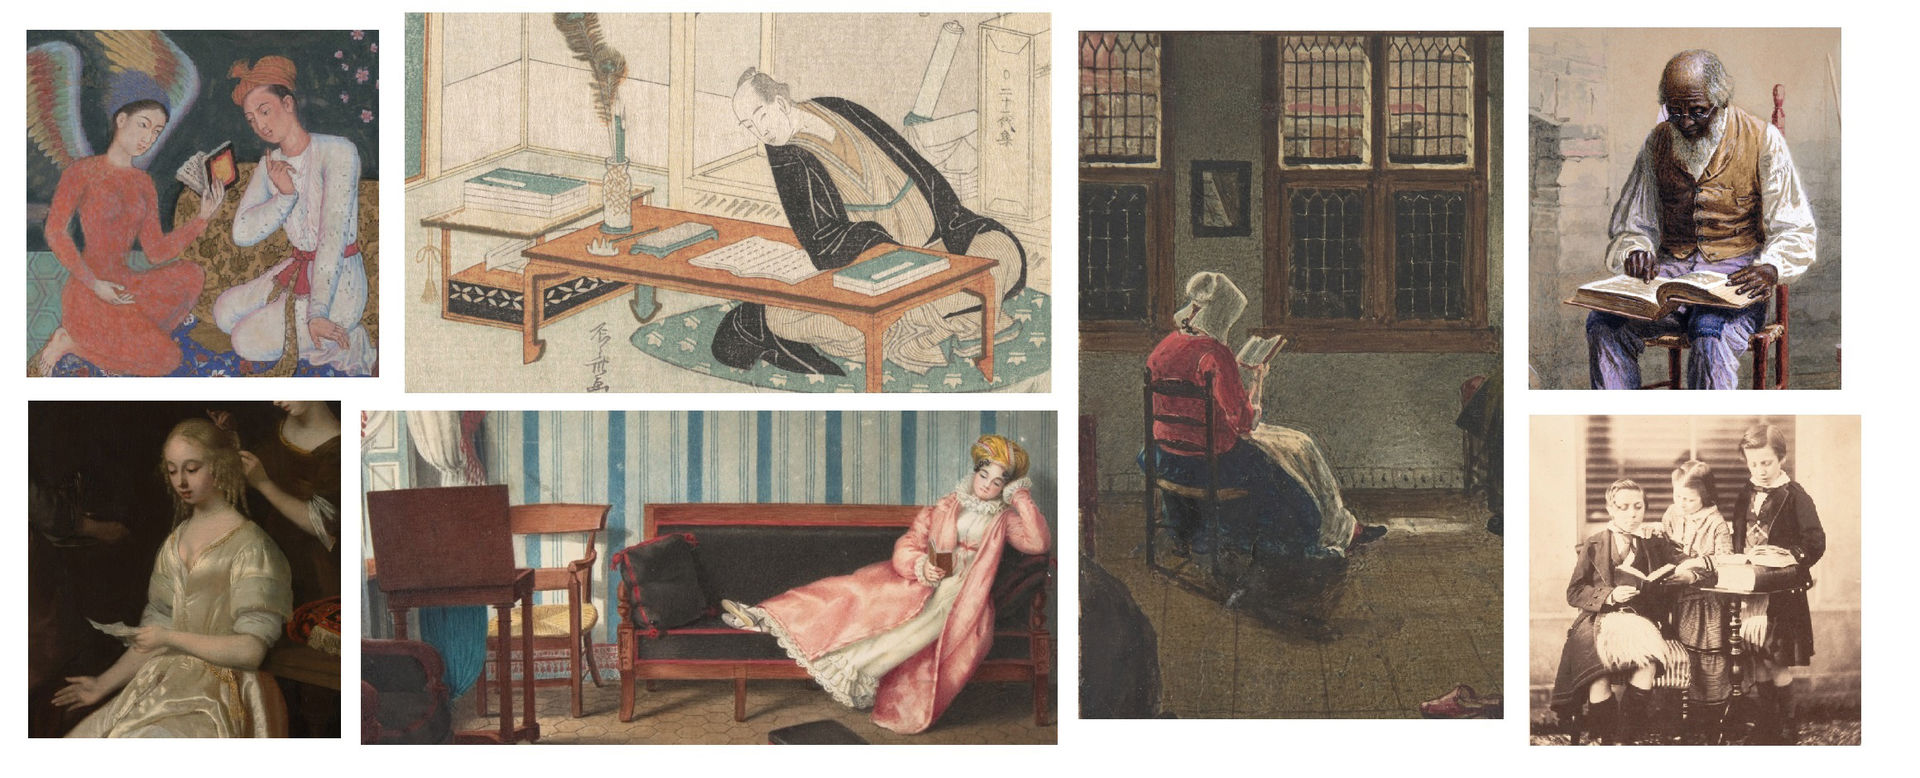 A collage of images of artworks depicting people reading